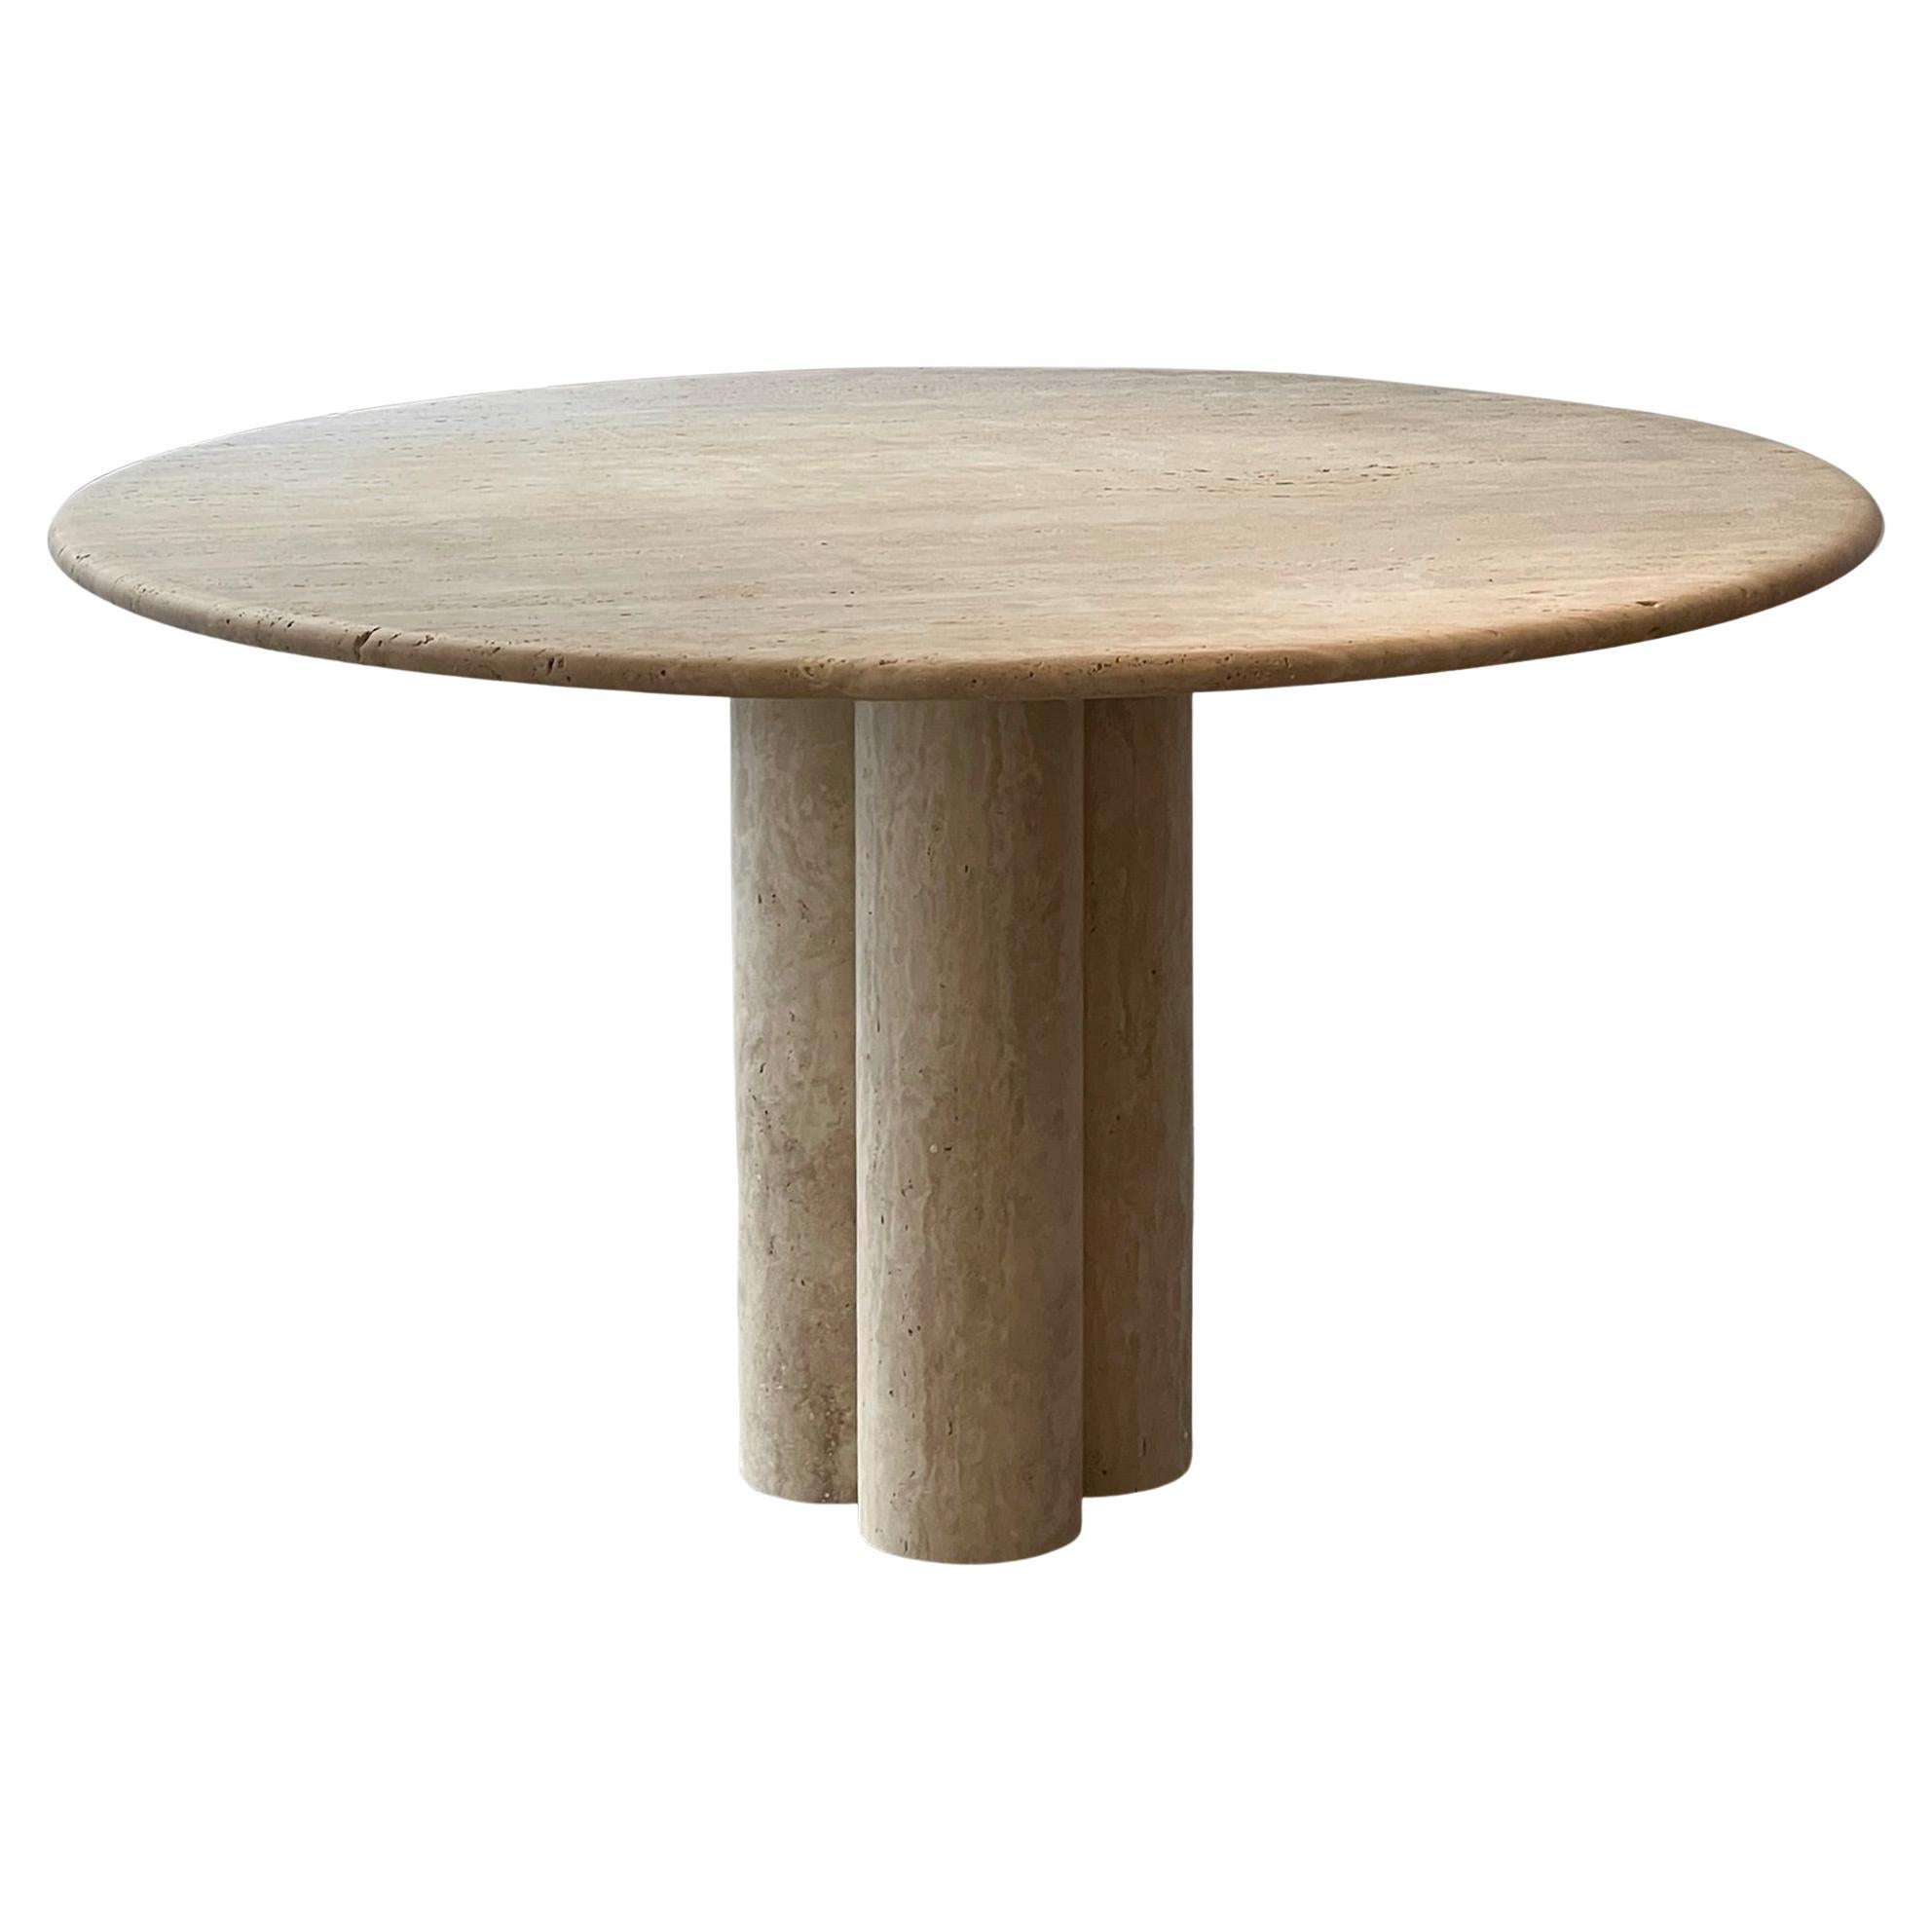 Circular travertine dining table For Sale